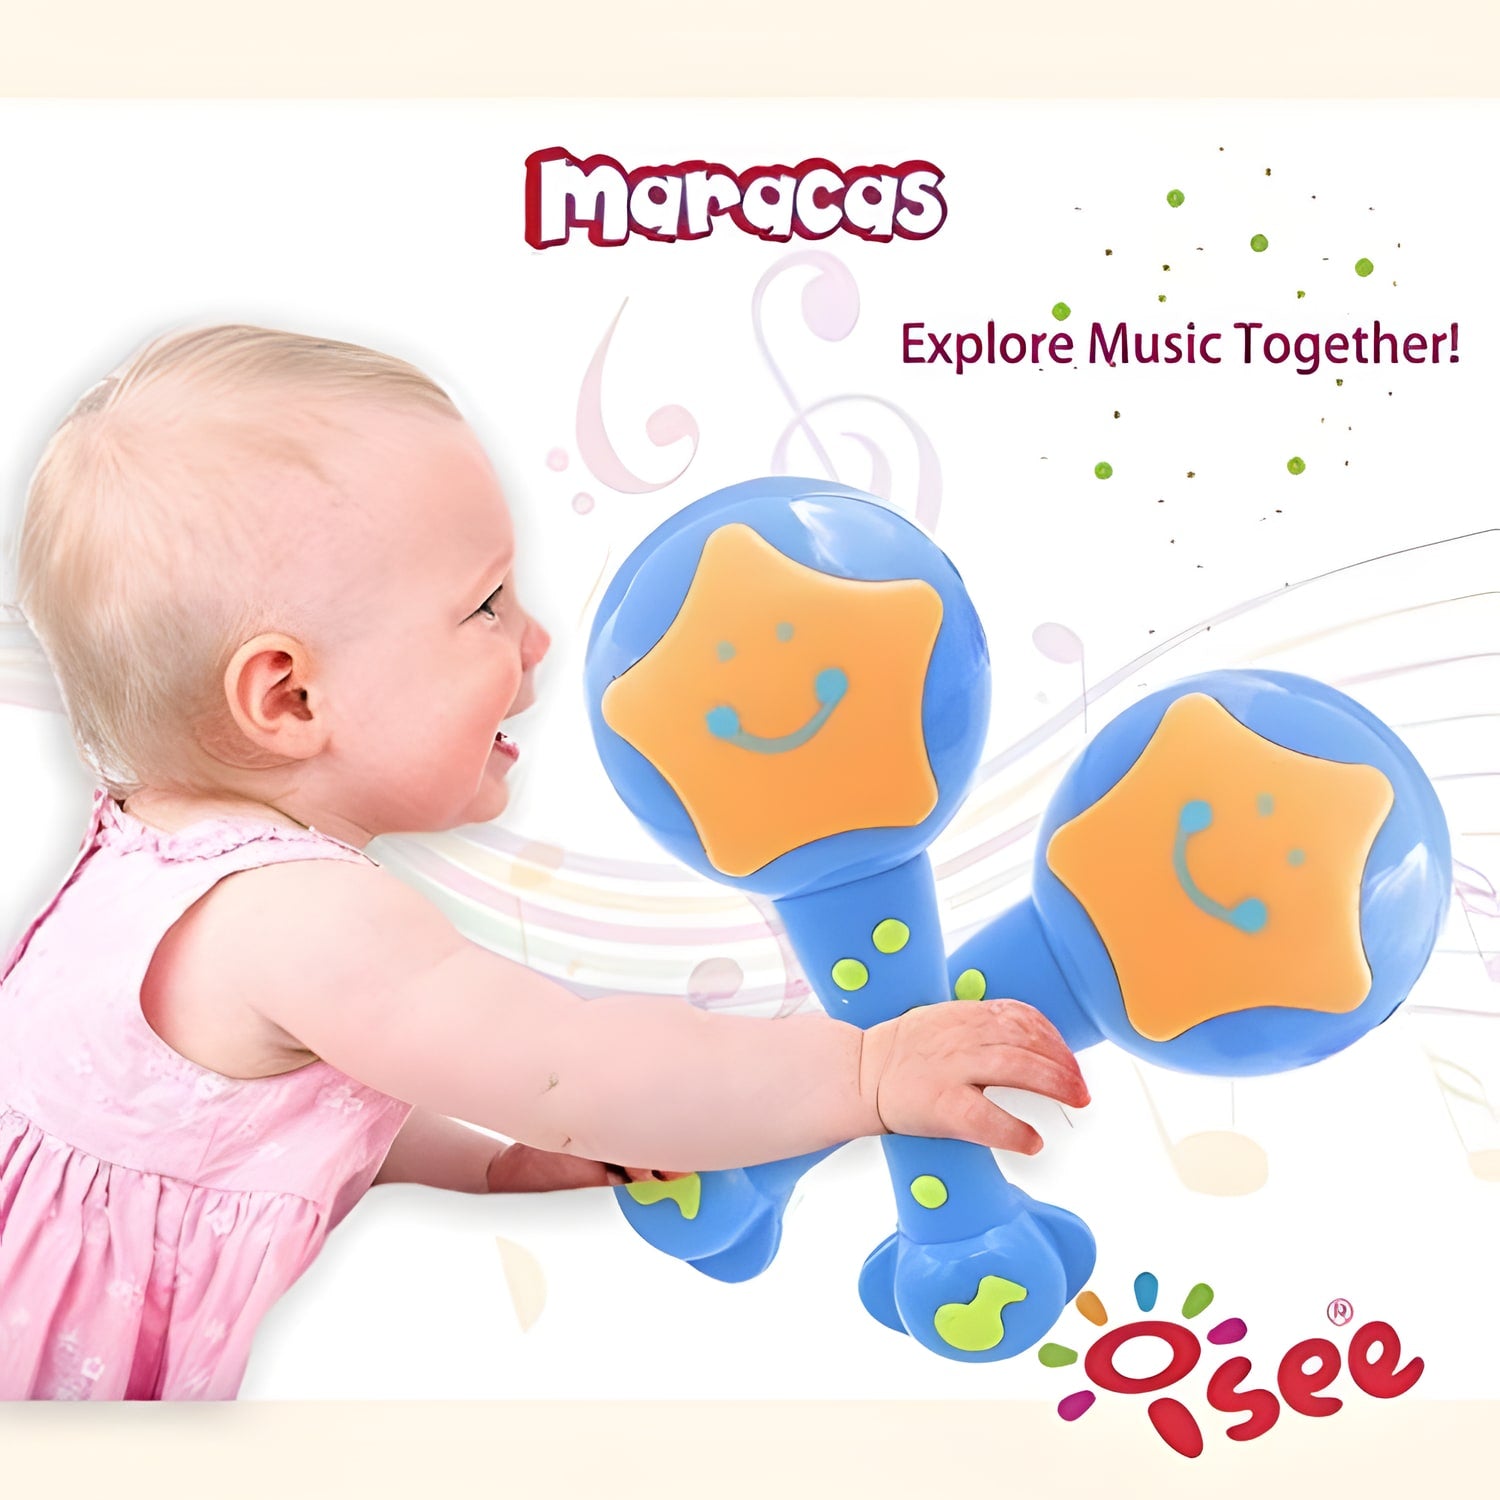 ISEE Baby Toys, Toddler Learning Musical Instruments, Preschool Musical Toys for Toddlers, Children's Educational Drums & Percussion for Baby Boys Girls 6M+